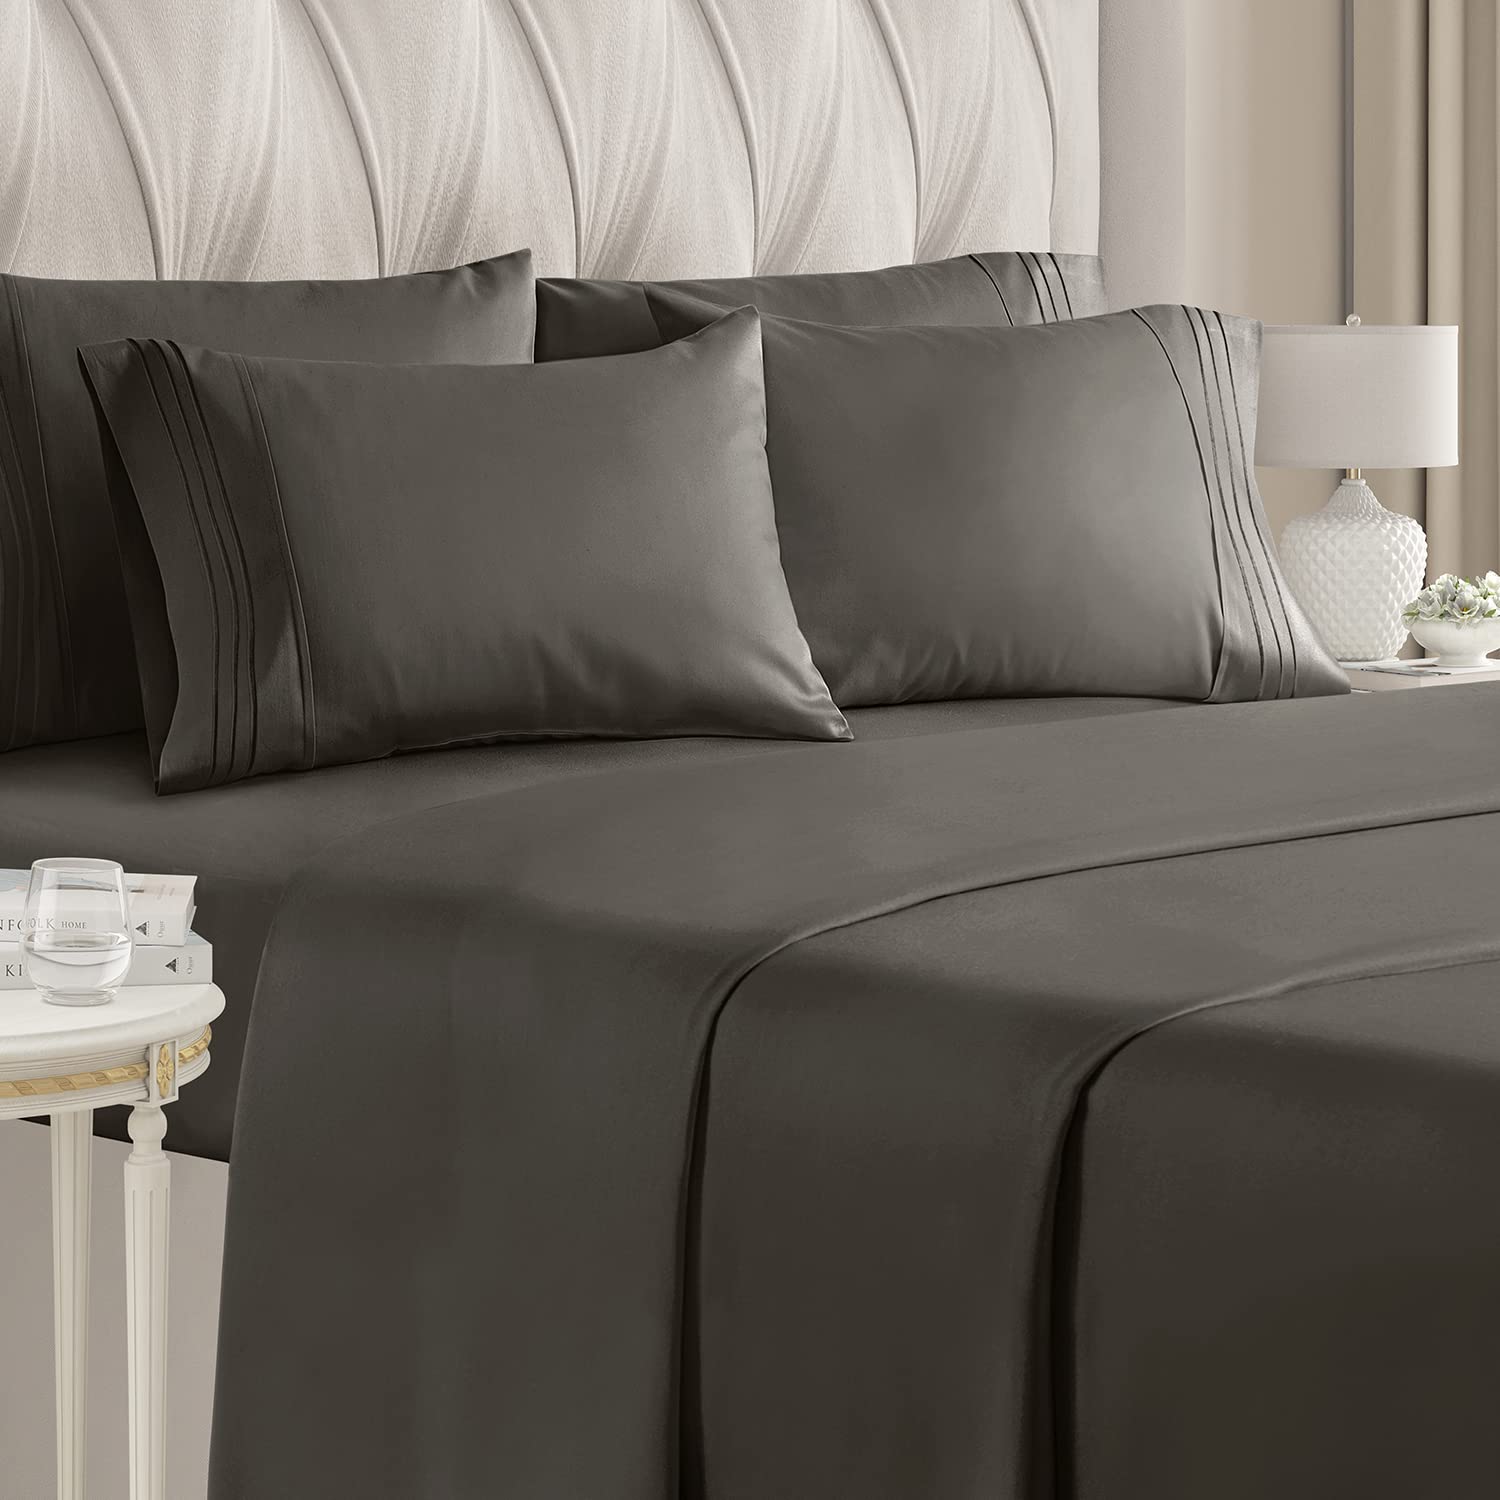 Book Cover Full Size Sheet Set - 6 Piece Set - Hotel Luxury Bed Sheets - Extra Soft - Deep Pockets - Easy Fit - Breathable & Cooling Sheets - Wrinkle Free - Dark Gray - Grey Bed Sheets - Fulls Sheets - 6 PC 03 - Dark Grey Full